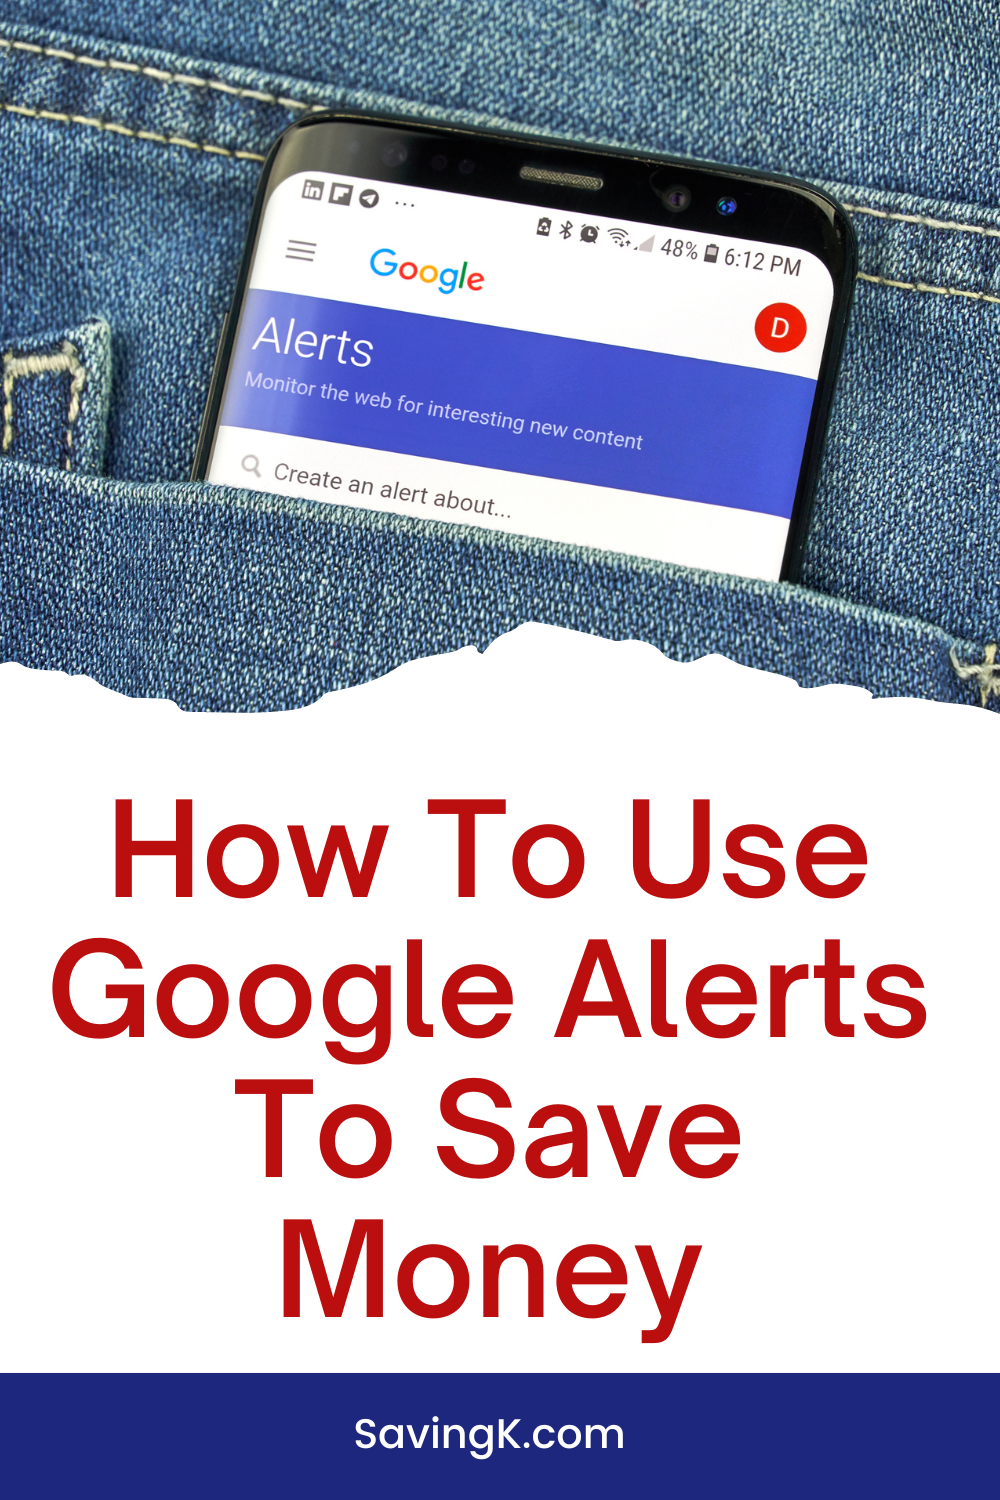 How To Use Google Alerts To Save Money